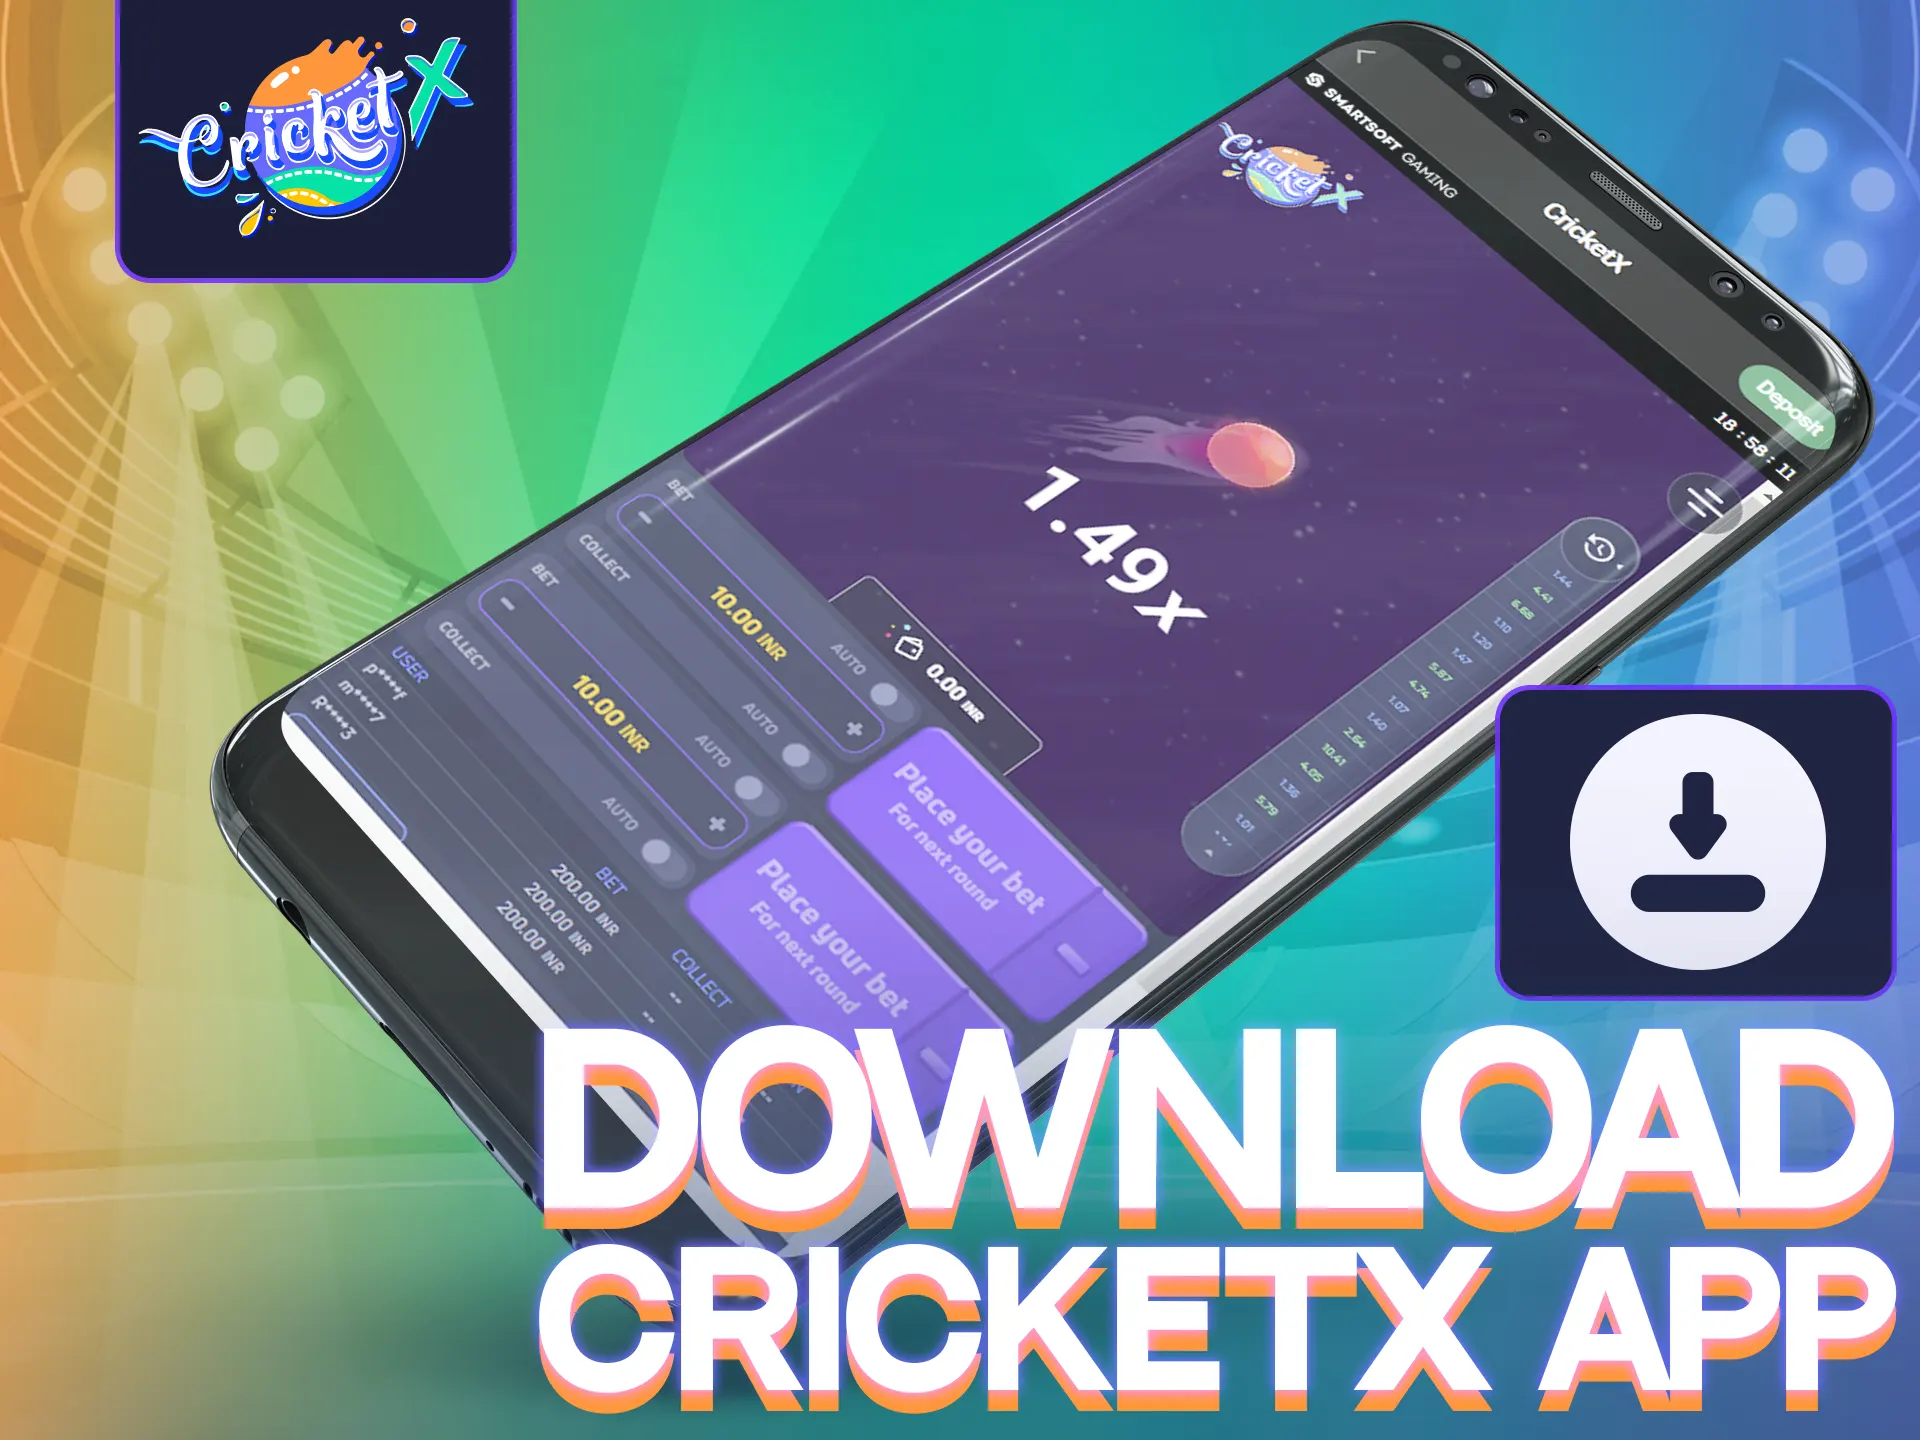 Bet quickly and securely with Cricket X on mobile, get app with simple download instructions.